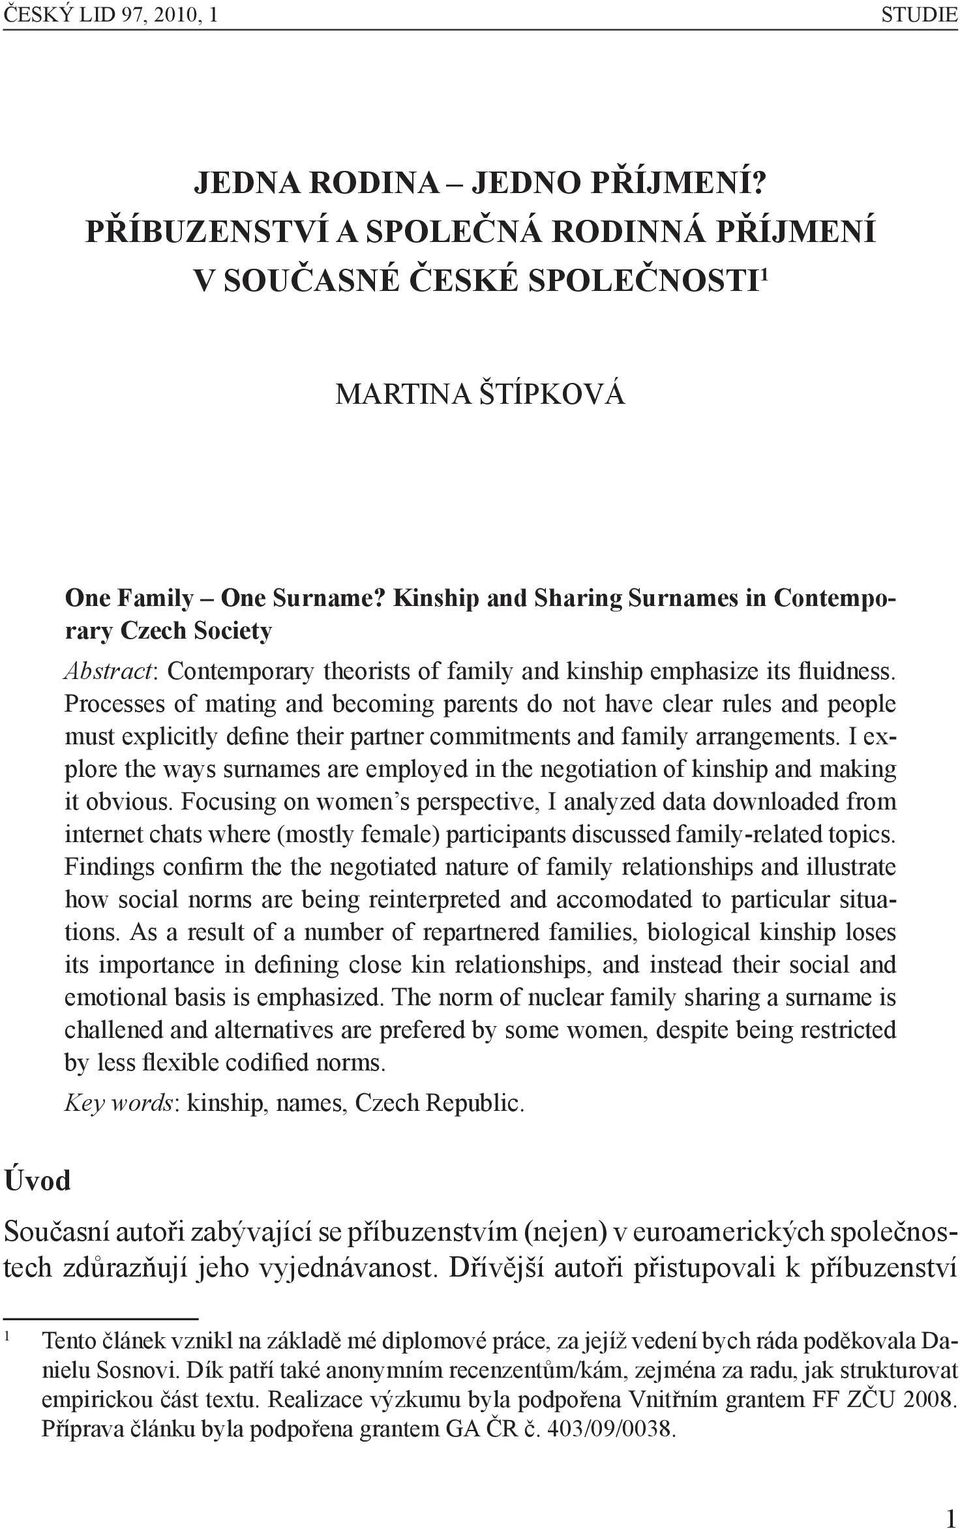 Processes of mating and becoming parents do not have clear rules and people must explicitly define their partner commitments and family arrangements.